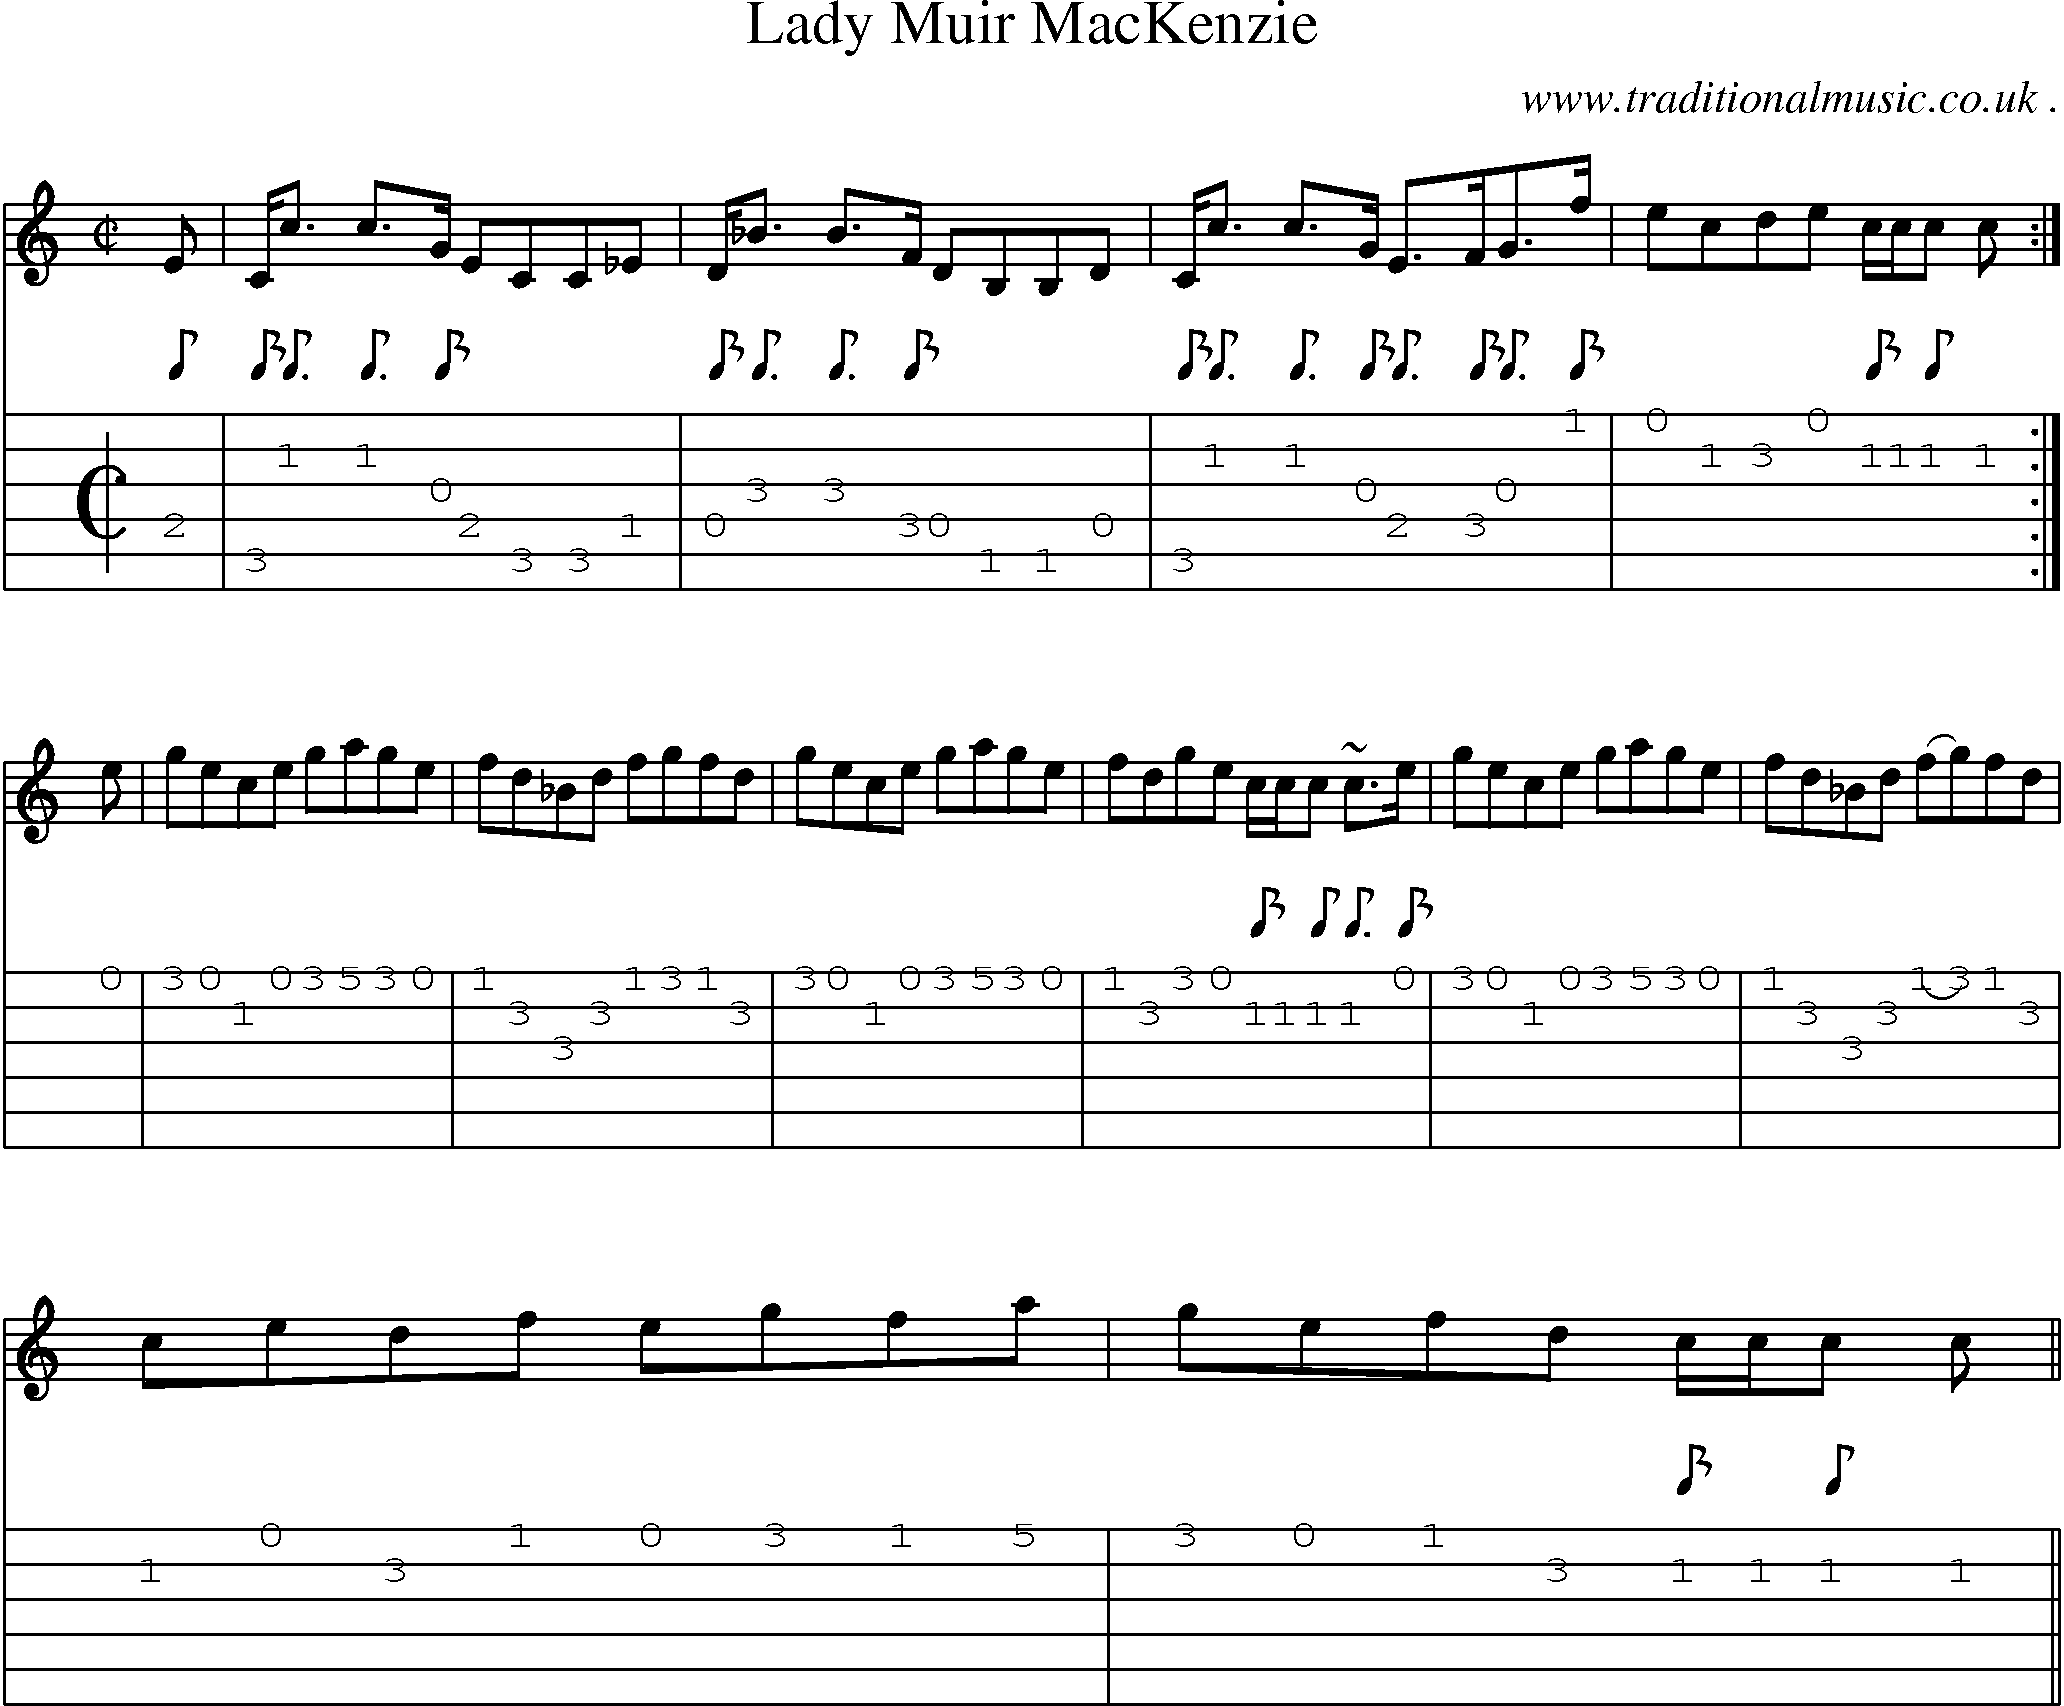 Sheet-music  score, Chords and Guitar Tabs for Lady Muir Mackenzie